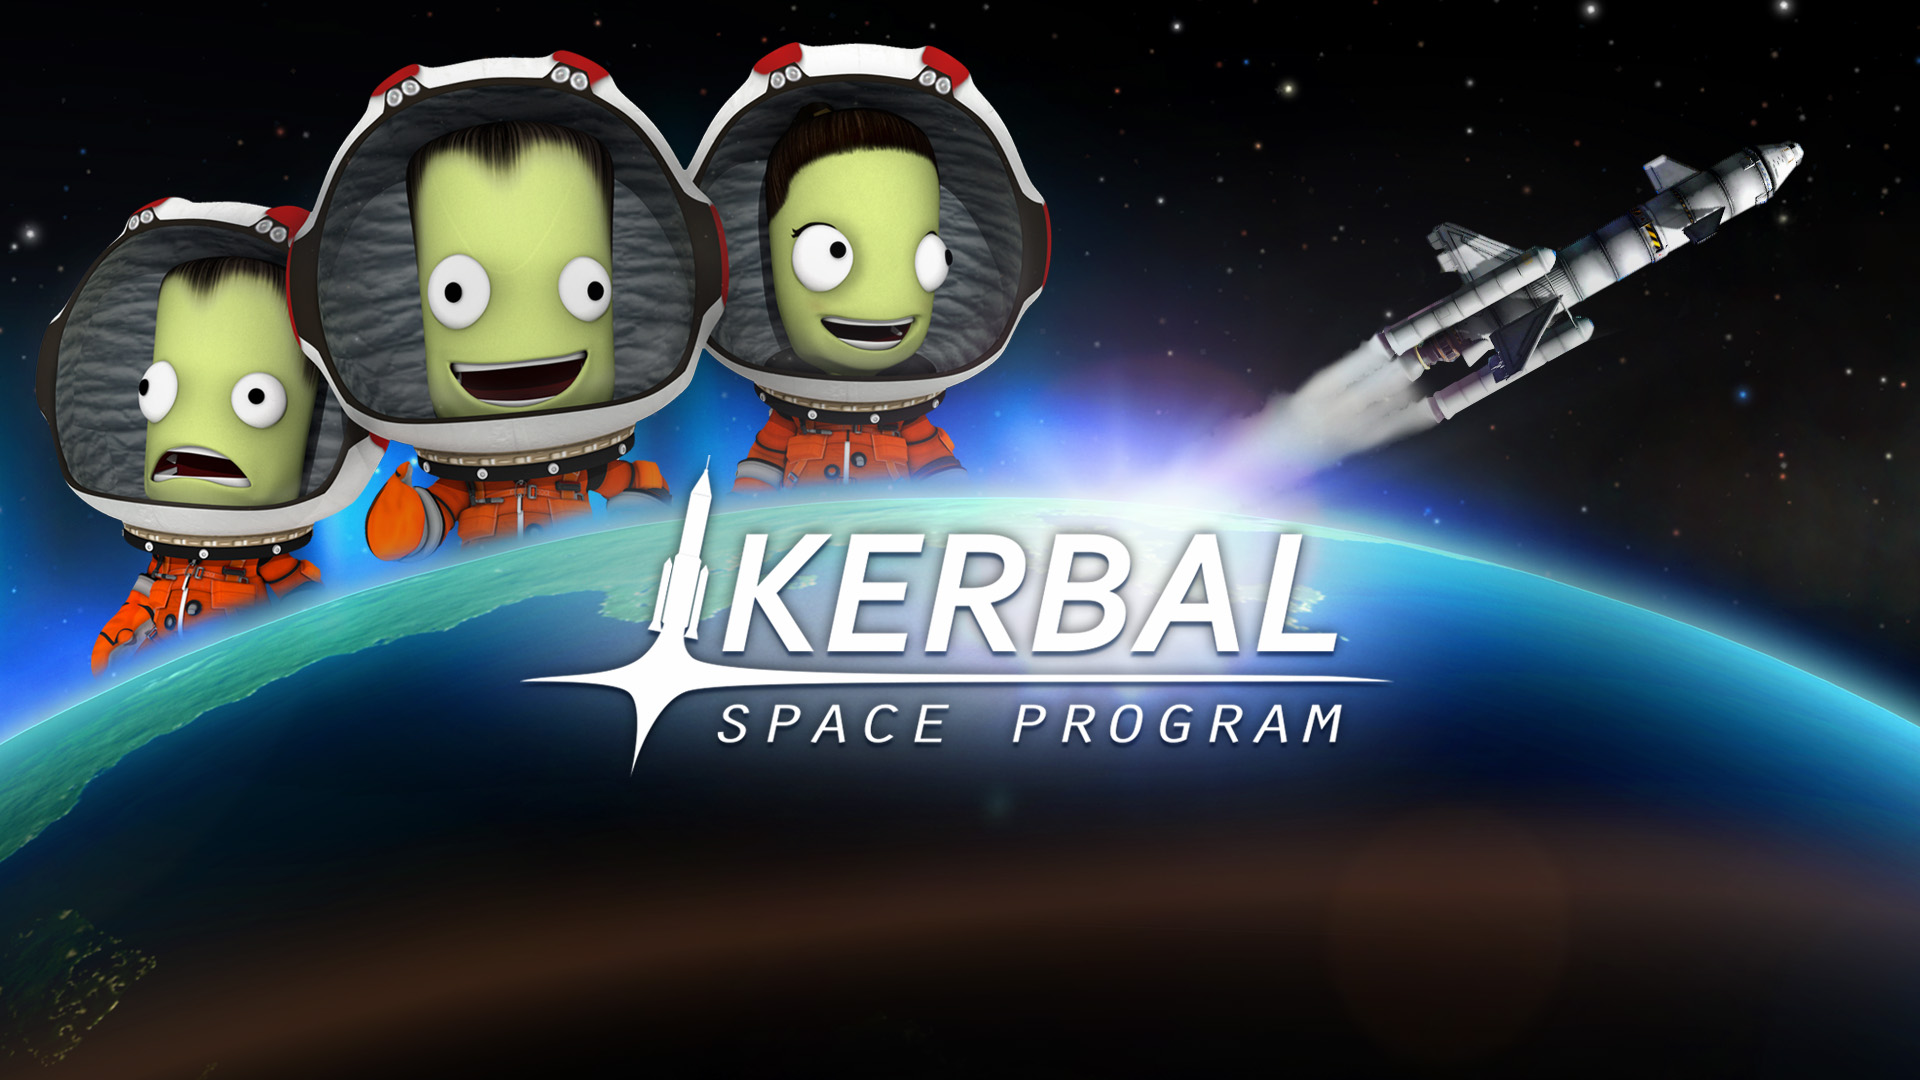 download ksp 2 steam for free